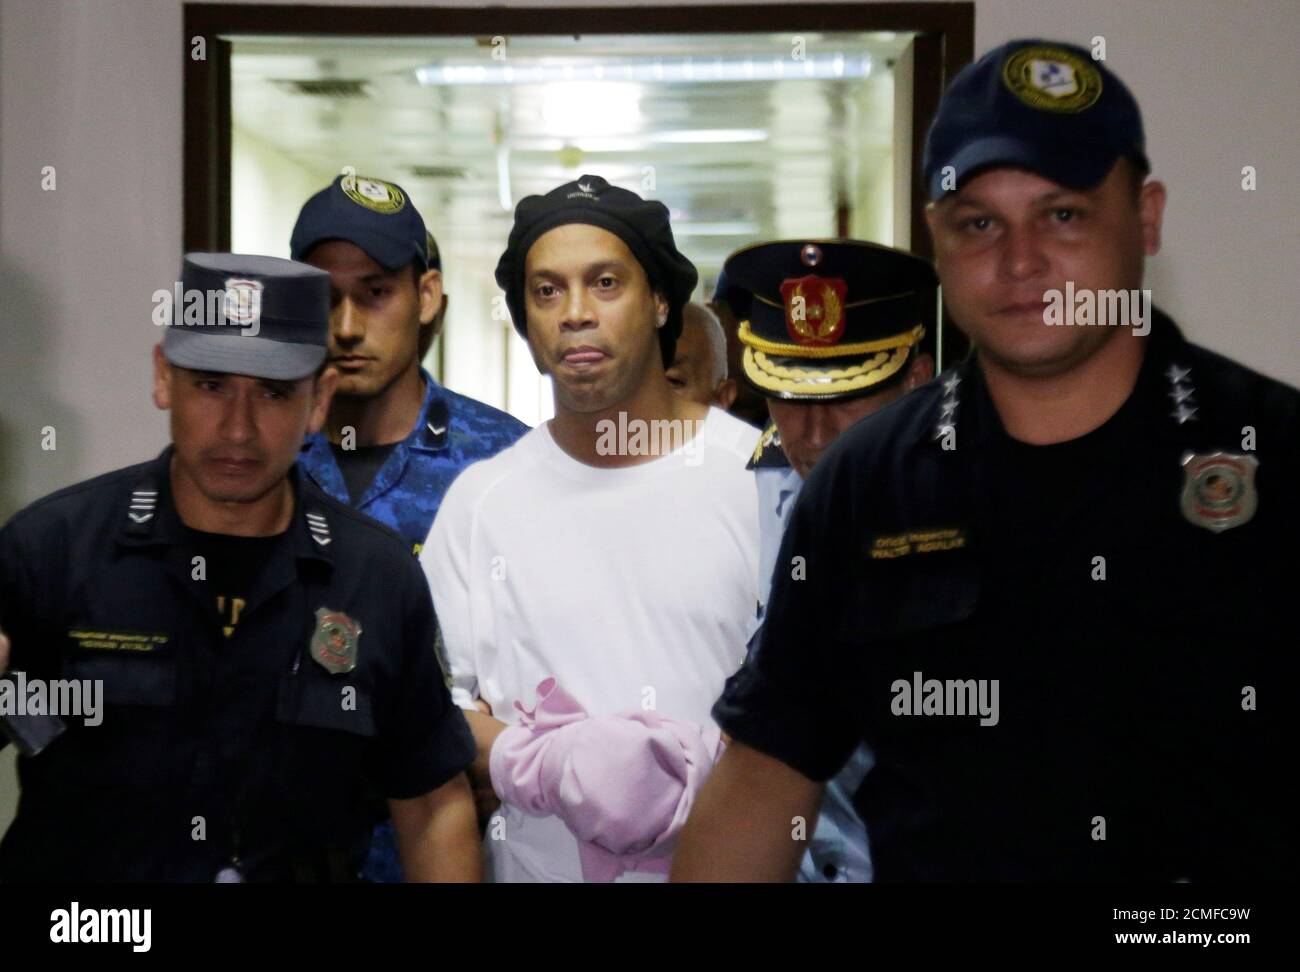 Judge rules Ronaldinho must remain in Paraguayan jail - Paraguayan Supreme Court, Asuncion, Paraguay - March 7, 2020? Ronaldinho handcuffed and escorted by police at the Supreme Court of Paraguay?REUTERS/Jorge Adorno Stock Photo